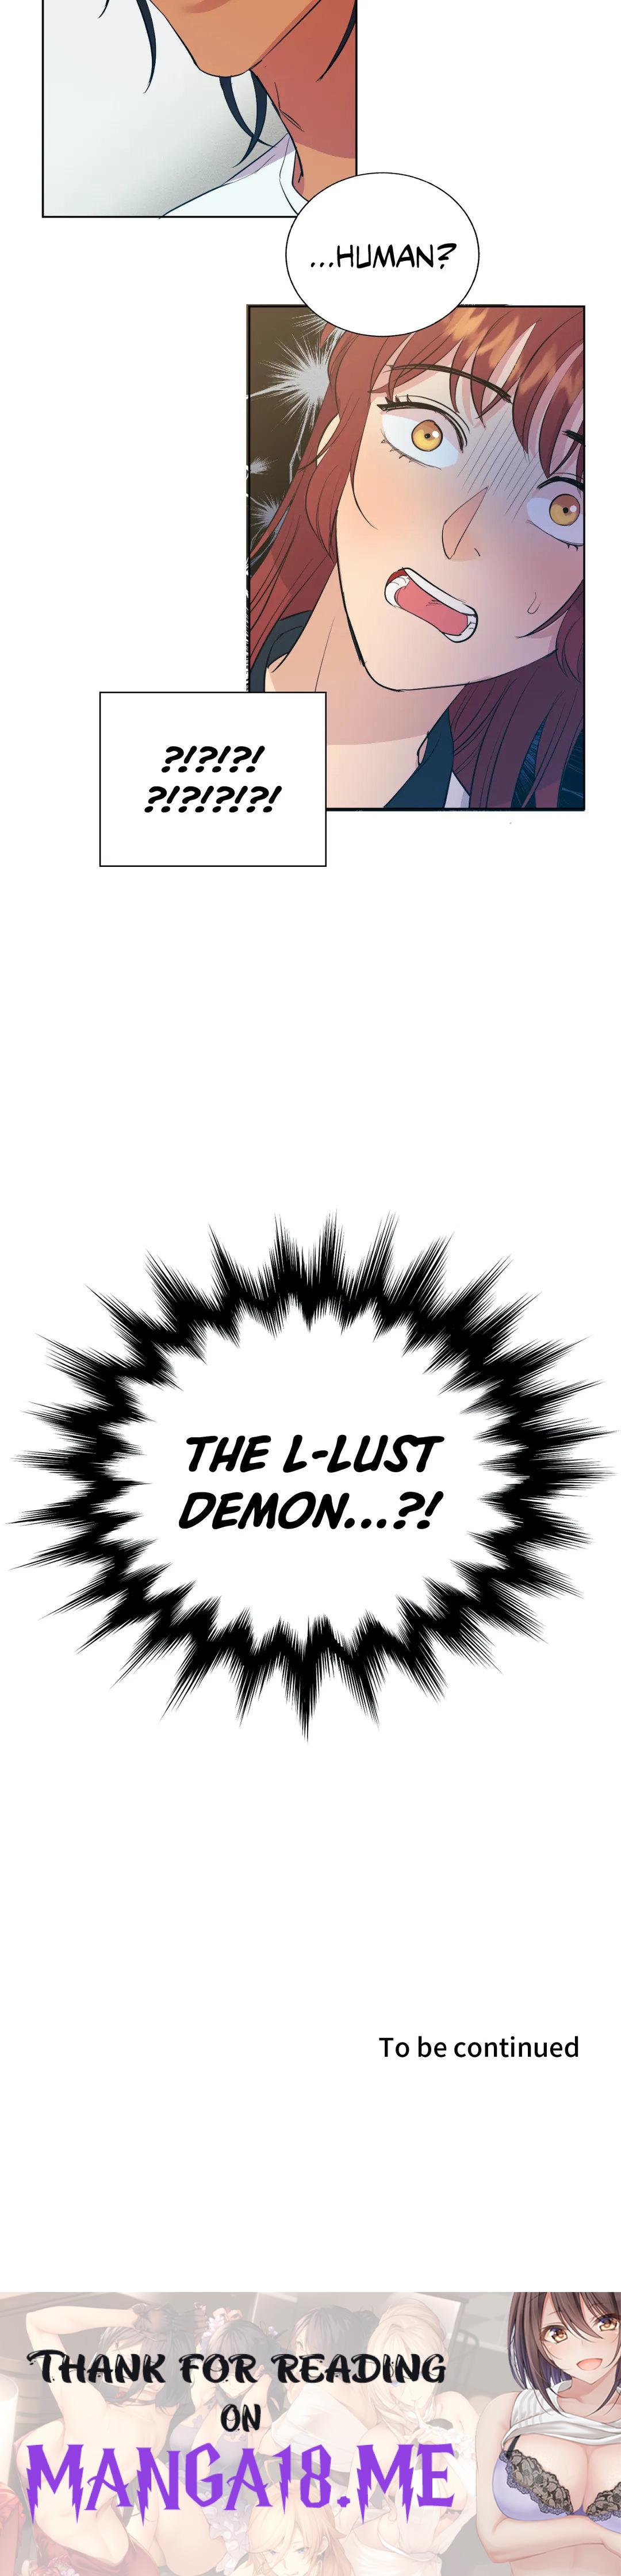 Hana’s Demons of Lust - Chapter 5 Page 26